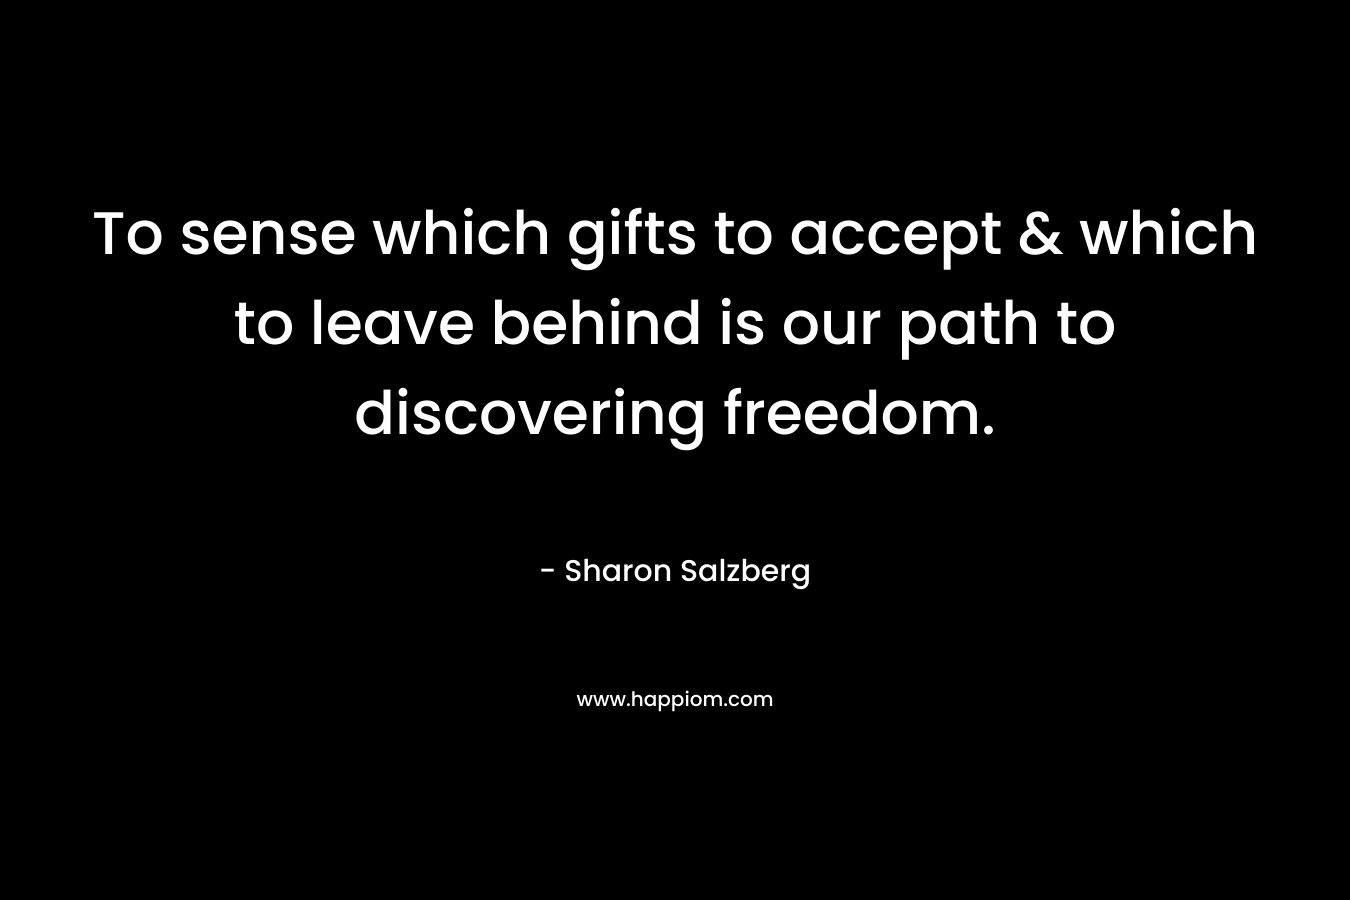 To sense which gifts to accept & which to leave behind is our path to discovering freedom. – Sharon Salzberg